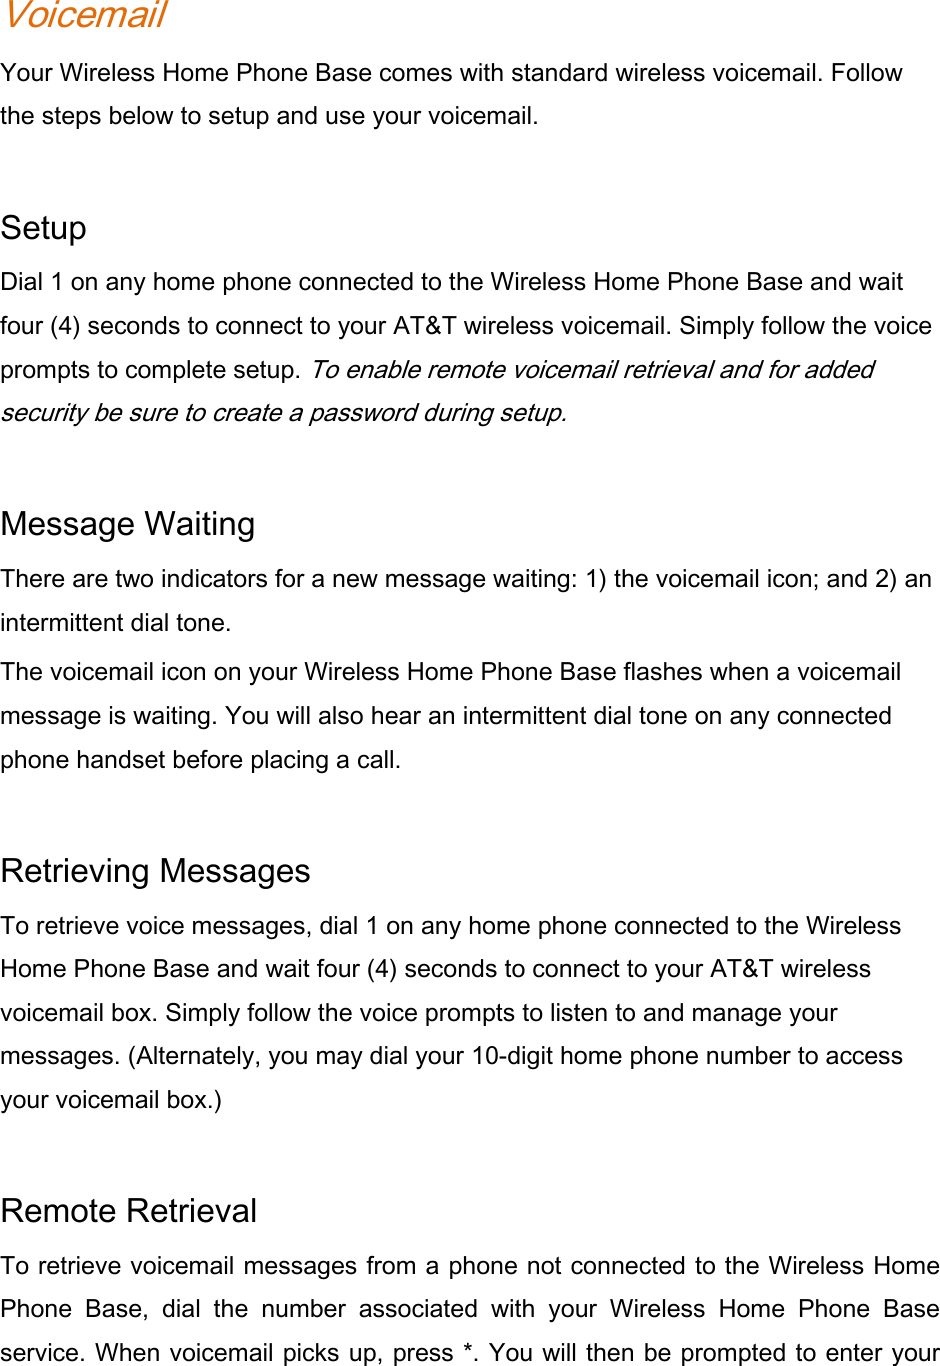 Voicemail Your Wireless Home Phone Base comes with standard wireless voicemail. Follow the steps below to setup and use your voicemail.    Setup Dial 1 on any home phone connected to the Wireless Home Phone Base and wait four (4) seconds to connect to your AT&amp;T wireless voicemail. Simply follow the voice prompts to complete setup. To enable remote voicemail retrieval and for added security be sure to create a password during setup.   Message Waiting There are two indicators for a new message waiting: 1) the voicemail icon; and 2) an intermittent dial tone. The voicemail icon on your Wireless Home Phone Base flashes when a voicemail message is waiting. You will also hear an intermittent dial tone on any connected phone handset before placing a call.    Retrieving Messages To retrieve voice messages, dial 1 on any home phone connected to the Wireless Home Phone Base and wait four (4) seconds to connect to your AT&amp;T wireless voicemail box. Simply follow the voice prompts to listen to and manage your messages. (Alternately, you may dial your 10-digit home phone number to access your voicemail box.)    Remote Retrieval   To retrieve voicemail messages from a phone not connected to the Wireless Home Phone Base, dial the number associated with your Wireless Home Phone Base service. When voicemail picks up, press *. You will then be prompted to enter your 